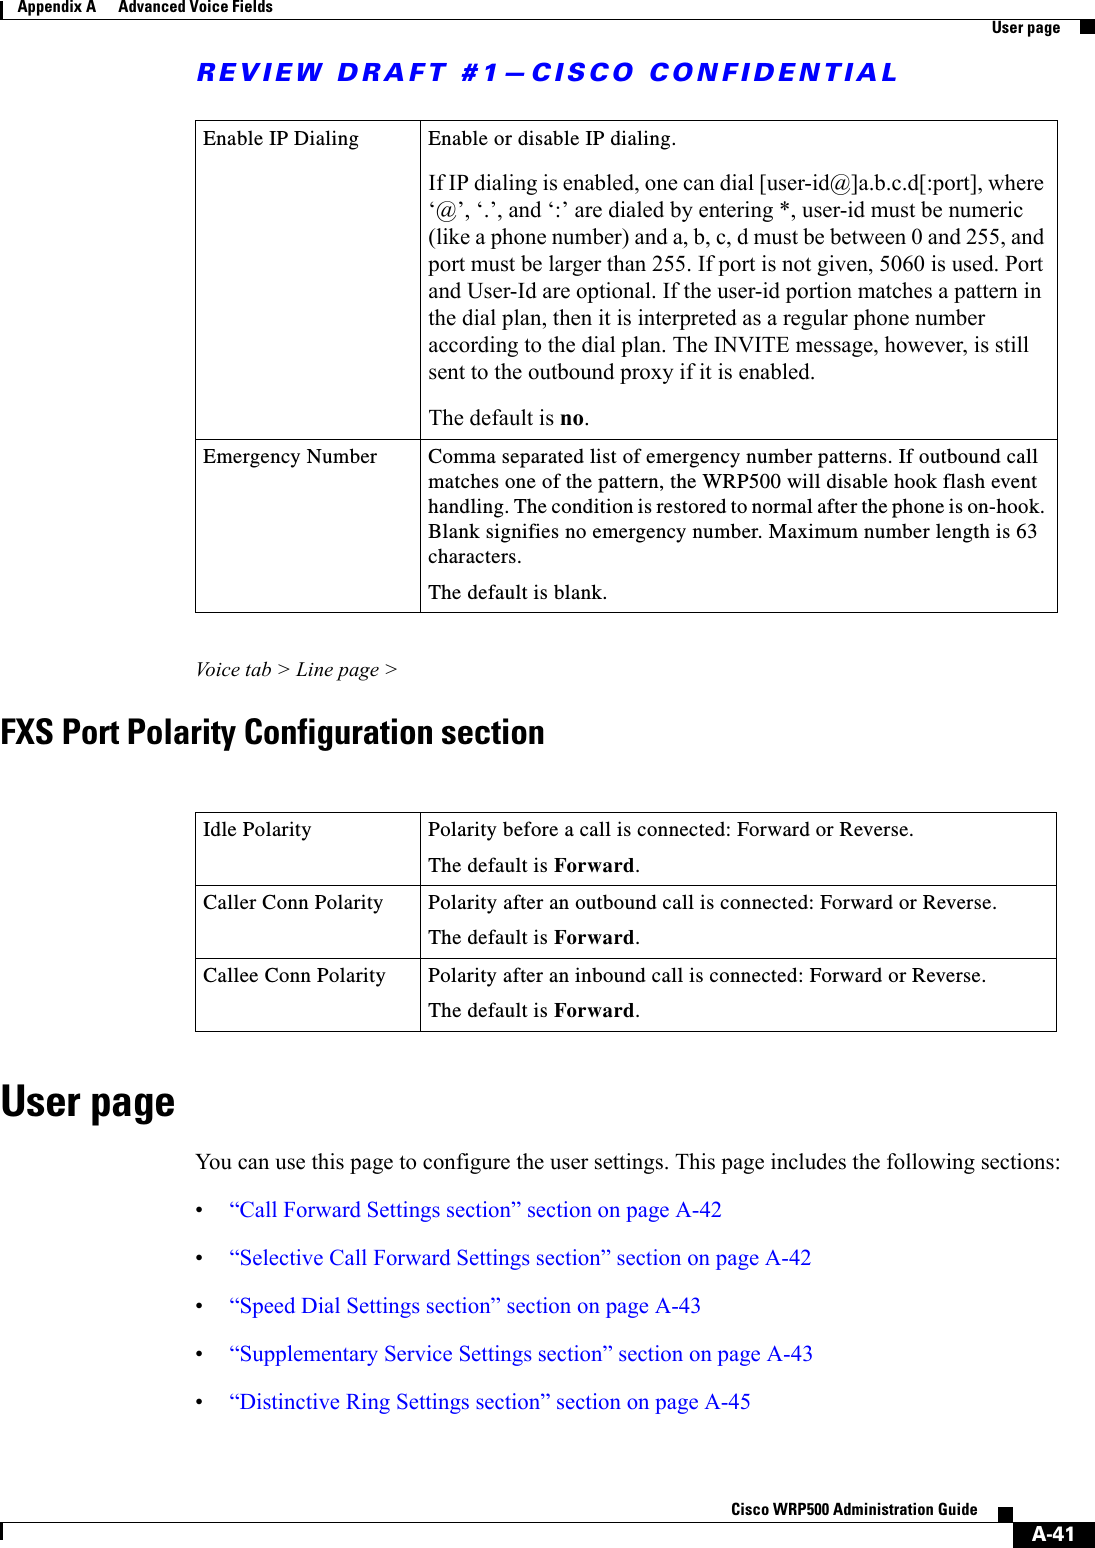 REVIEW DRAFT #1—CISCO CONFIDENTIALA-41Cisco WRP500 Administration Guide Appendix A      Advanced Voice Fields  User pageVoice tab &gt; Line page &gt;FXS Port Polarity Configuration sectionUser pageYou can use this page to configure the user settings. This page includes the following sections:•“Call Forward Settings section” section on page A-42•“Selective Call Forward Settings section” section on page A-42•“Speed Dial Settings section” section on page A-43•“Supplementary Service Settings section” section on page A-43 •“Distinctive Ring Settings section” section on page A-45Enable IP Dialing Enable or disable IP dialing.If IP dialing is enabled, one can dial [user-id@]a.b.c.d[:port], where ‘@’, ‘.’, and ‘:’ are dialed by entering *, user-id must be numeric (like a phone number) and a, b, c, d must be between 0 and 255, and port must be larger than 255. If port is not given, 5060 is used. Port and User-Id are optional. If the user-id portion matches a pattern in the dial plan, then it is interpreted as a regular phone number according to the dial plan. The INVITE message, however, is still sent to the outbound proxy if it is enabled.The default is no. Emergency Number Comma separated list of emergency number patterns. If outbound call matches one of the pattern, the WRP500 will disable hook flash event handling. The condition is restored to normal after the phone is on-hook. Blank signifies no emergency number. Maximum number length is 63 characters.The default is blank. Idle Polarity  Polarity before a call is connected: Forward or Reverse.The default is Forward.Caller Conn Polarity  Polarity after an outbound call is connected: Forward or Reverse.The default is Forward.Callee Conn Polarity  Polarity after an inbound call is connected: Forward or Reverse.The default is Forward.